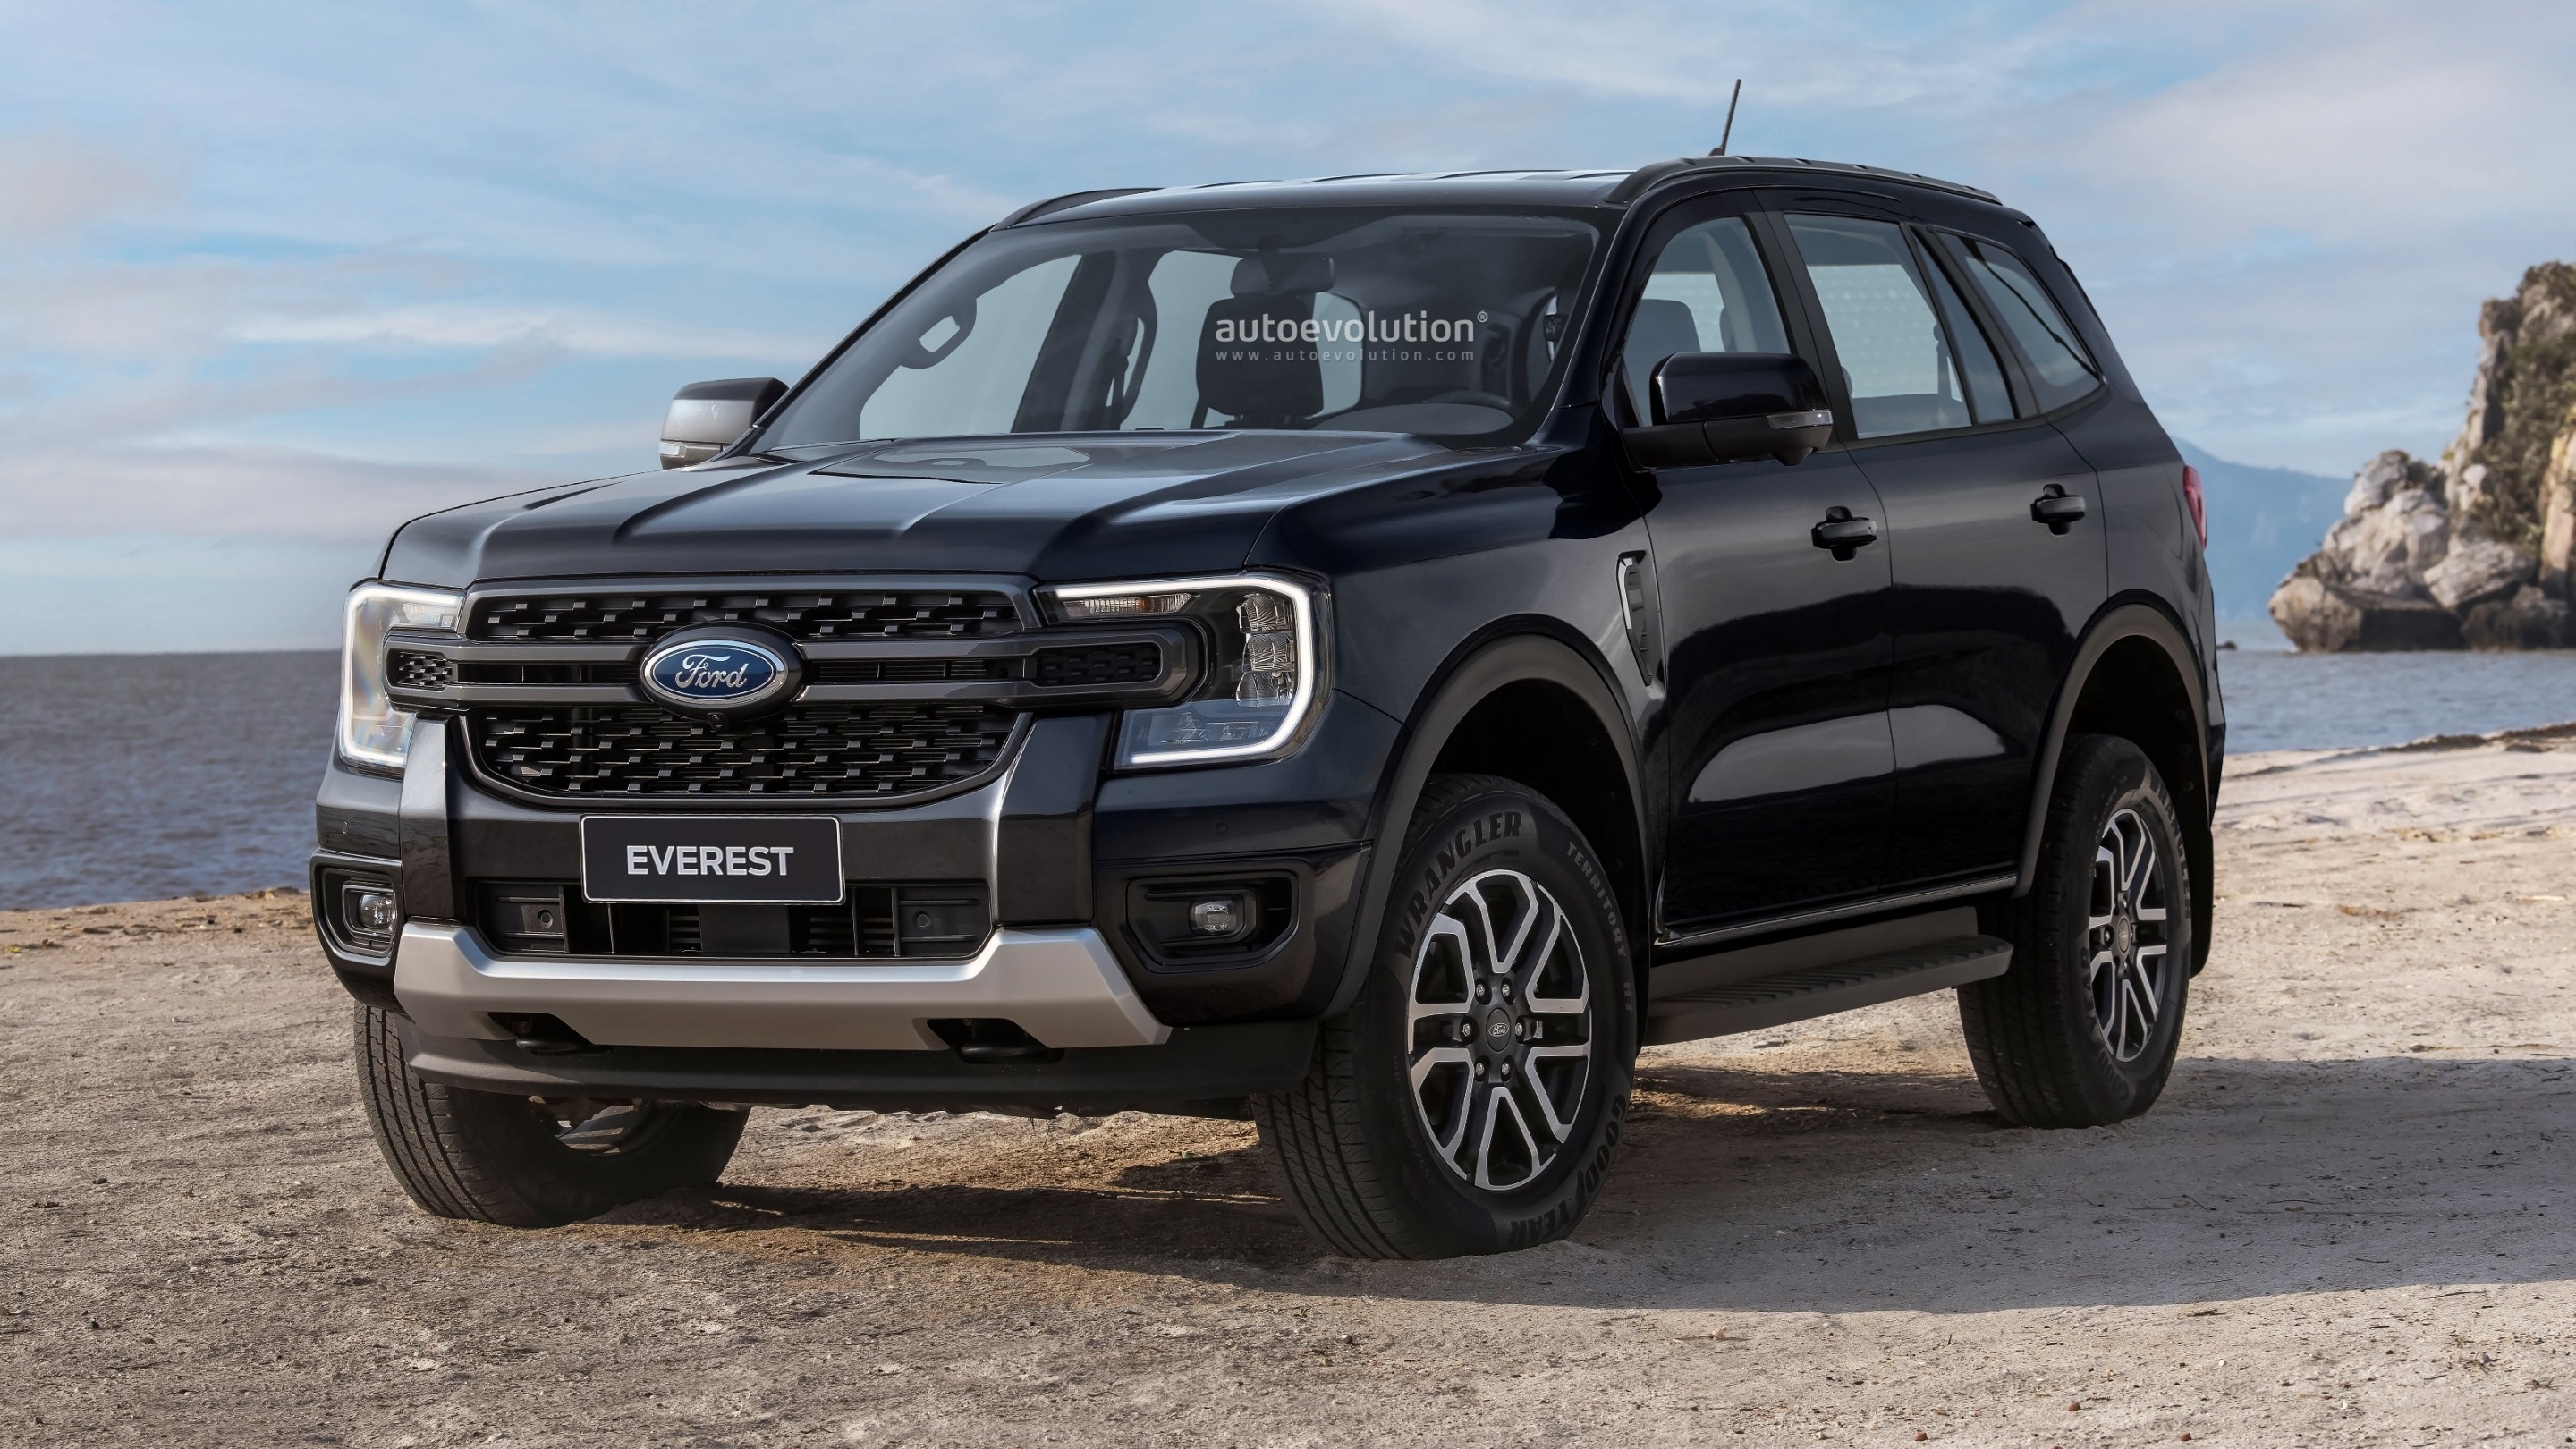 2023 Ford Everest Redesign 2022 And 2023 New Suv Models Images and